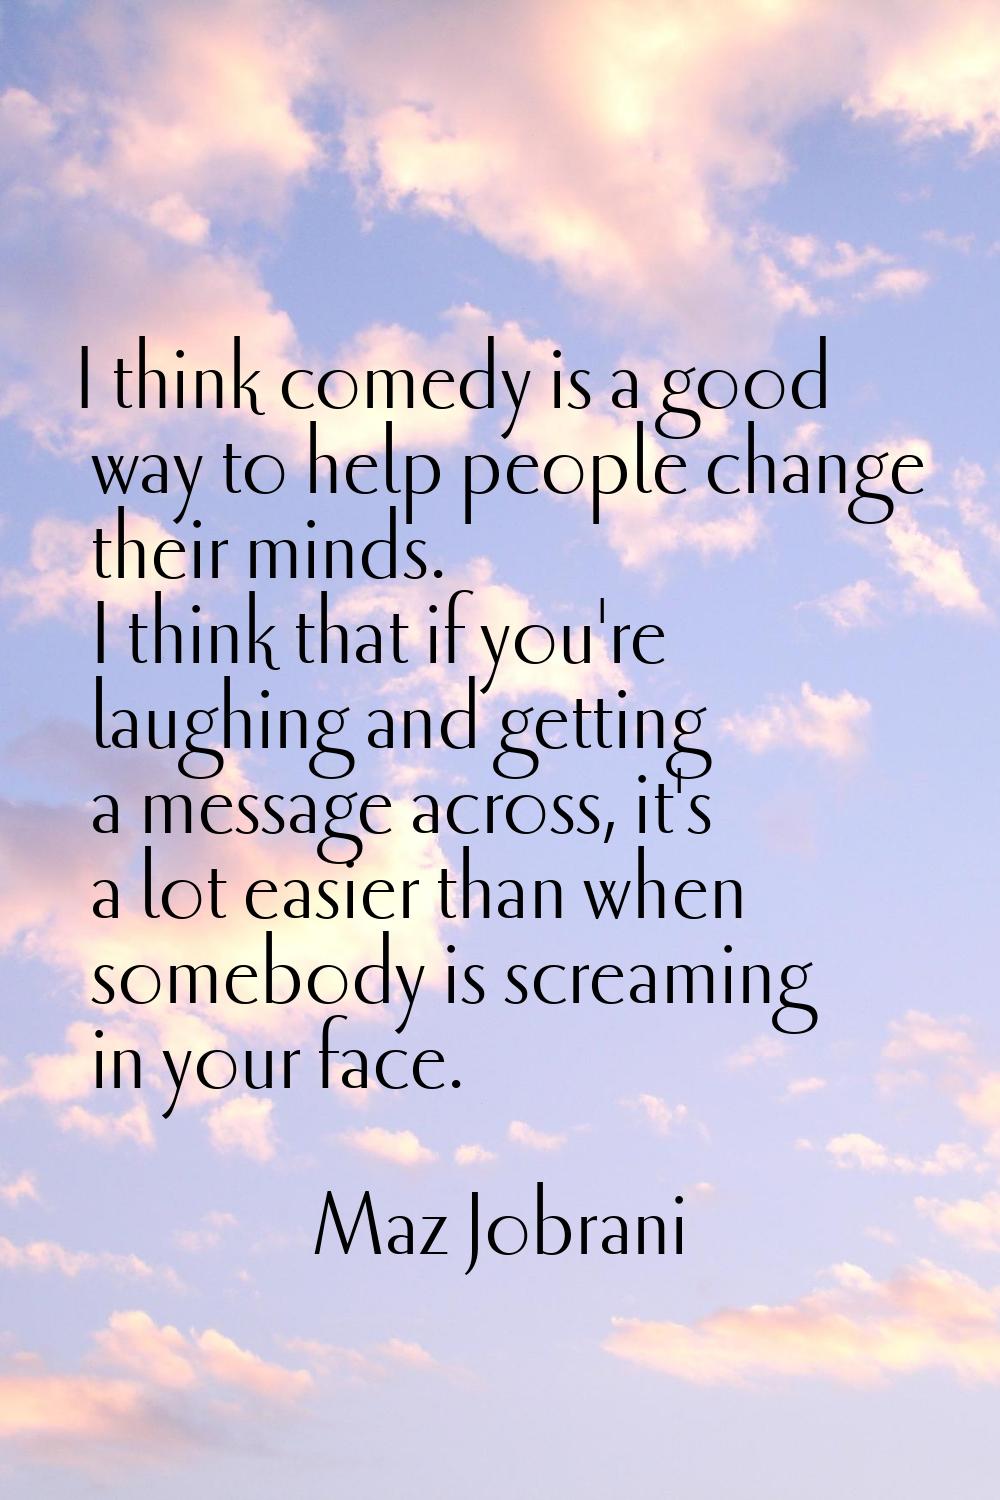 I think comedy is a good way to help people change their minds. I think that if you're laughing and